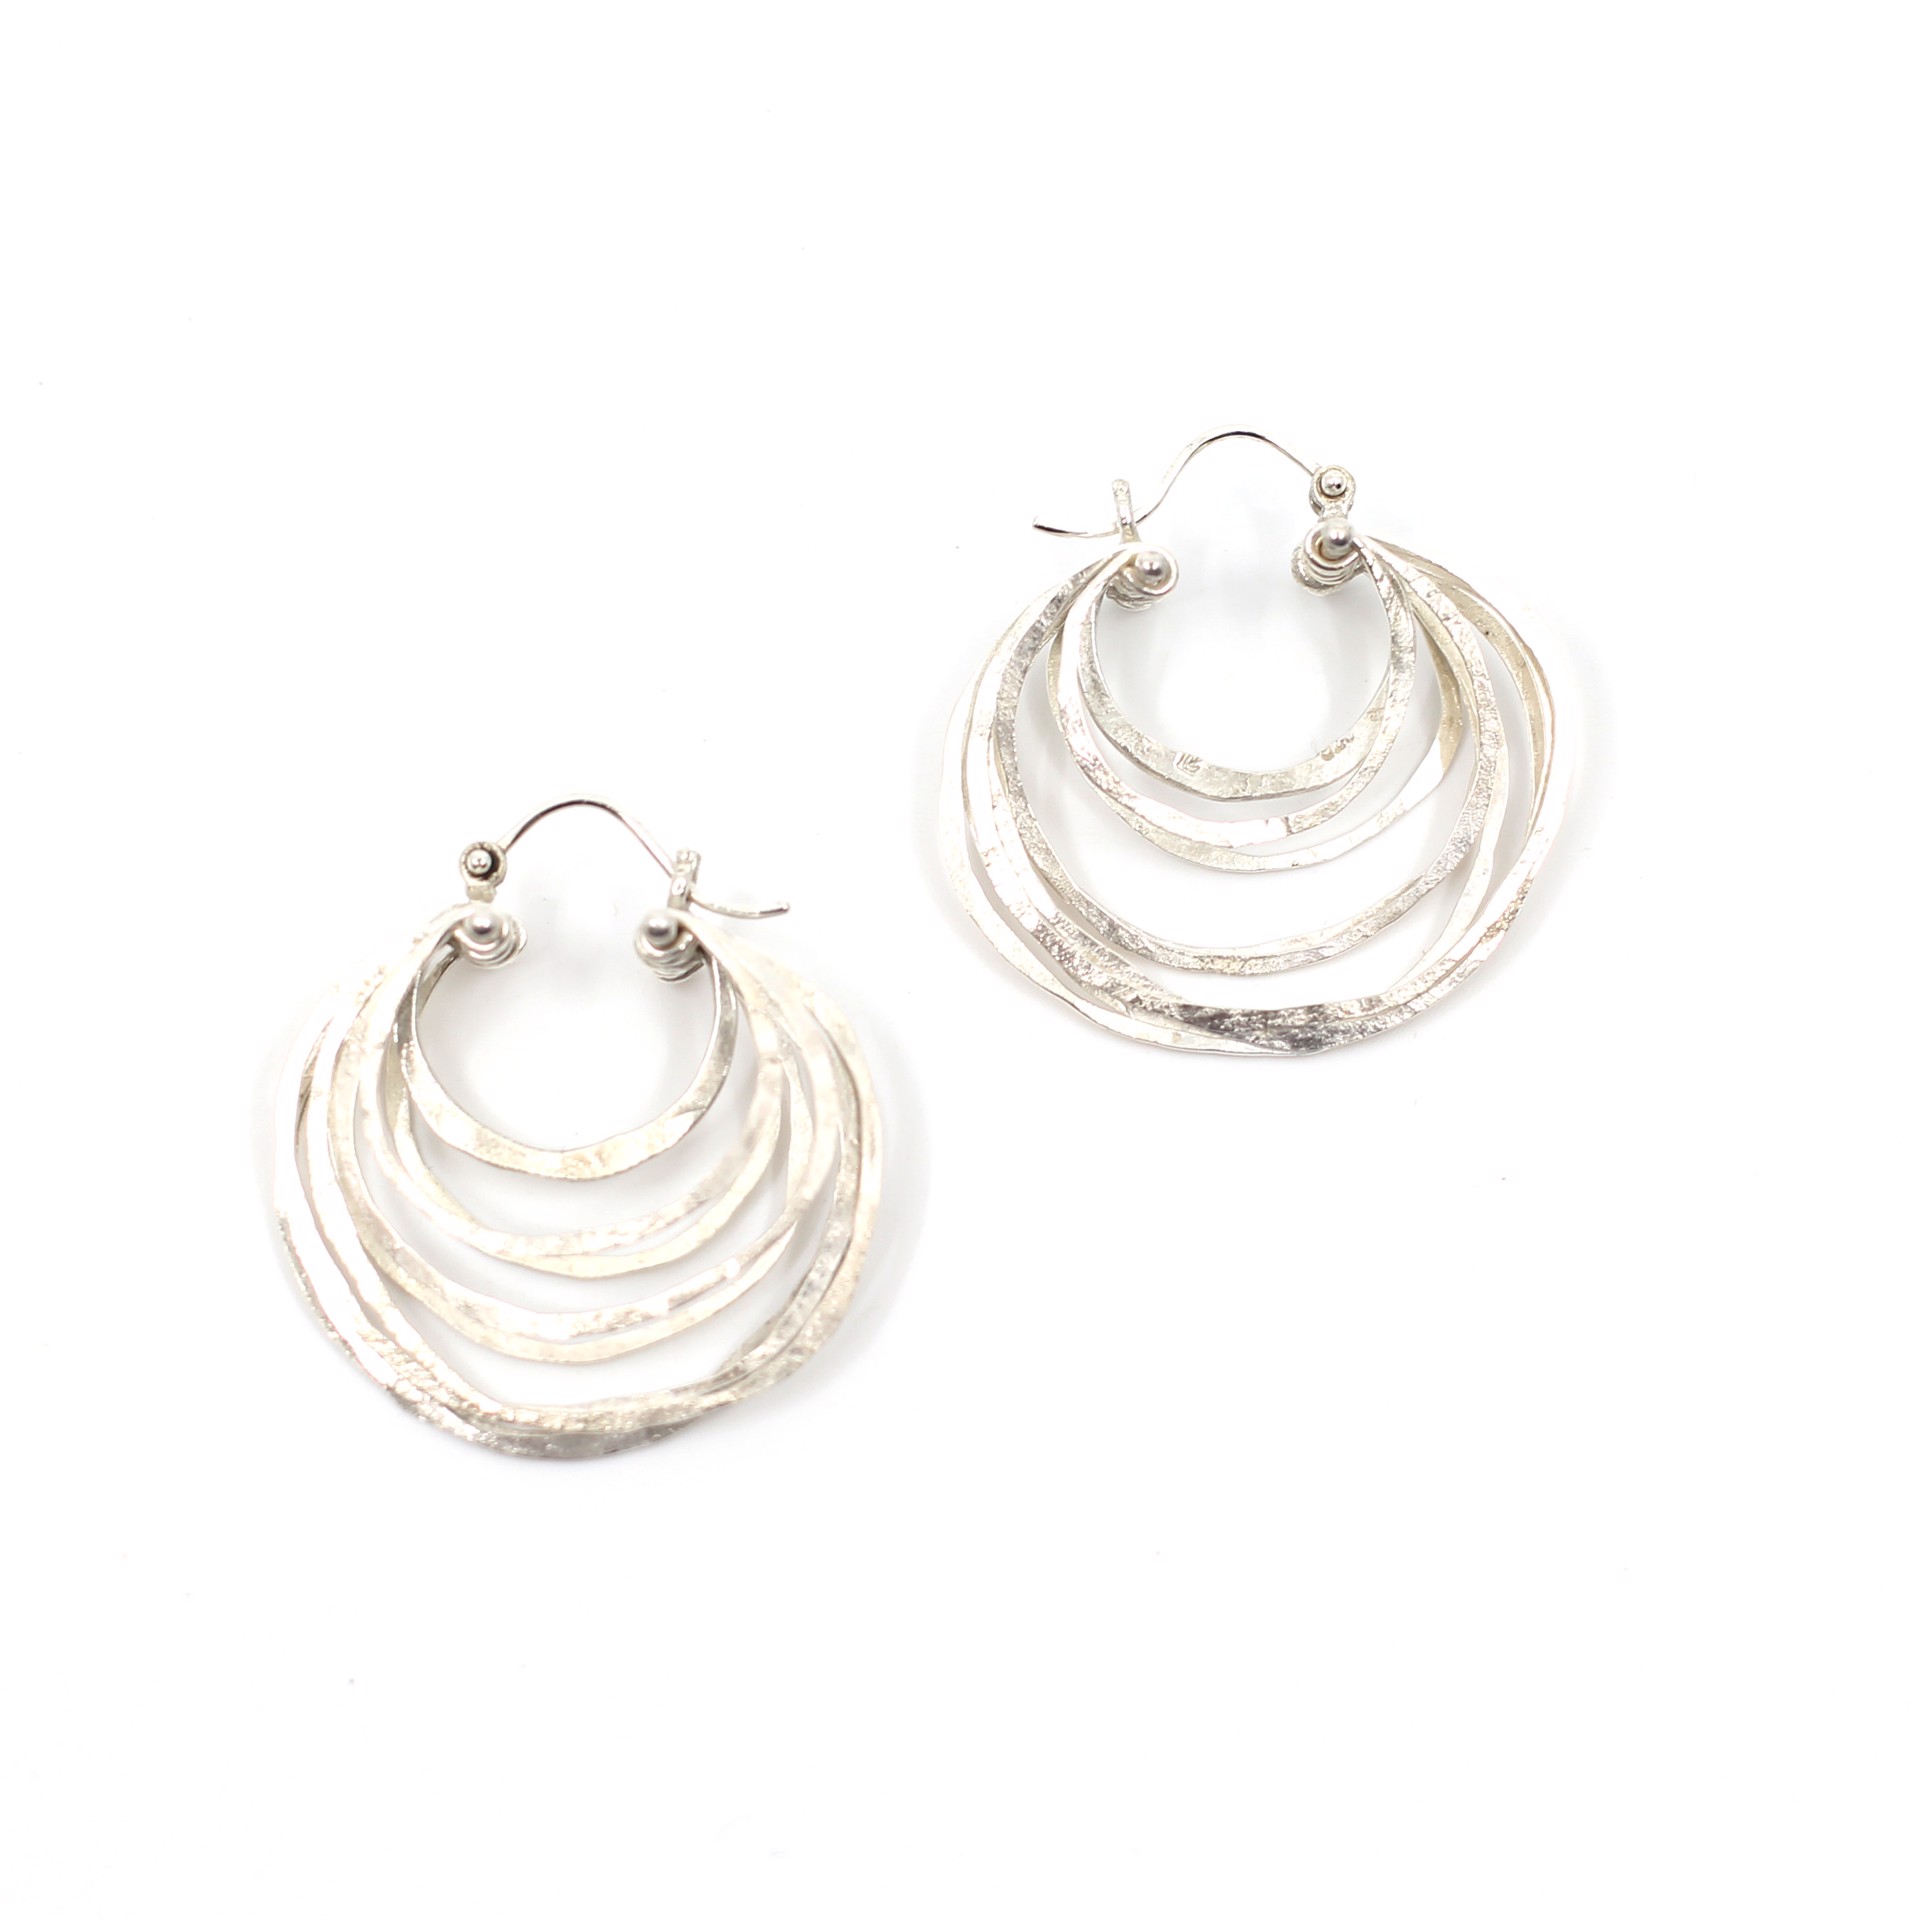 Small Crescent Hoop Earrings by Leia Zumbro